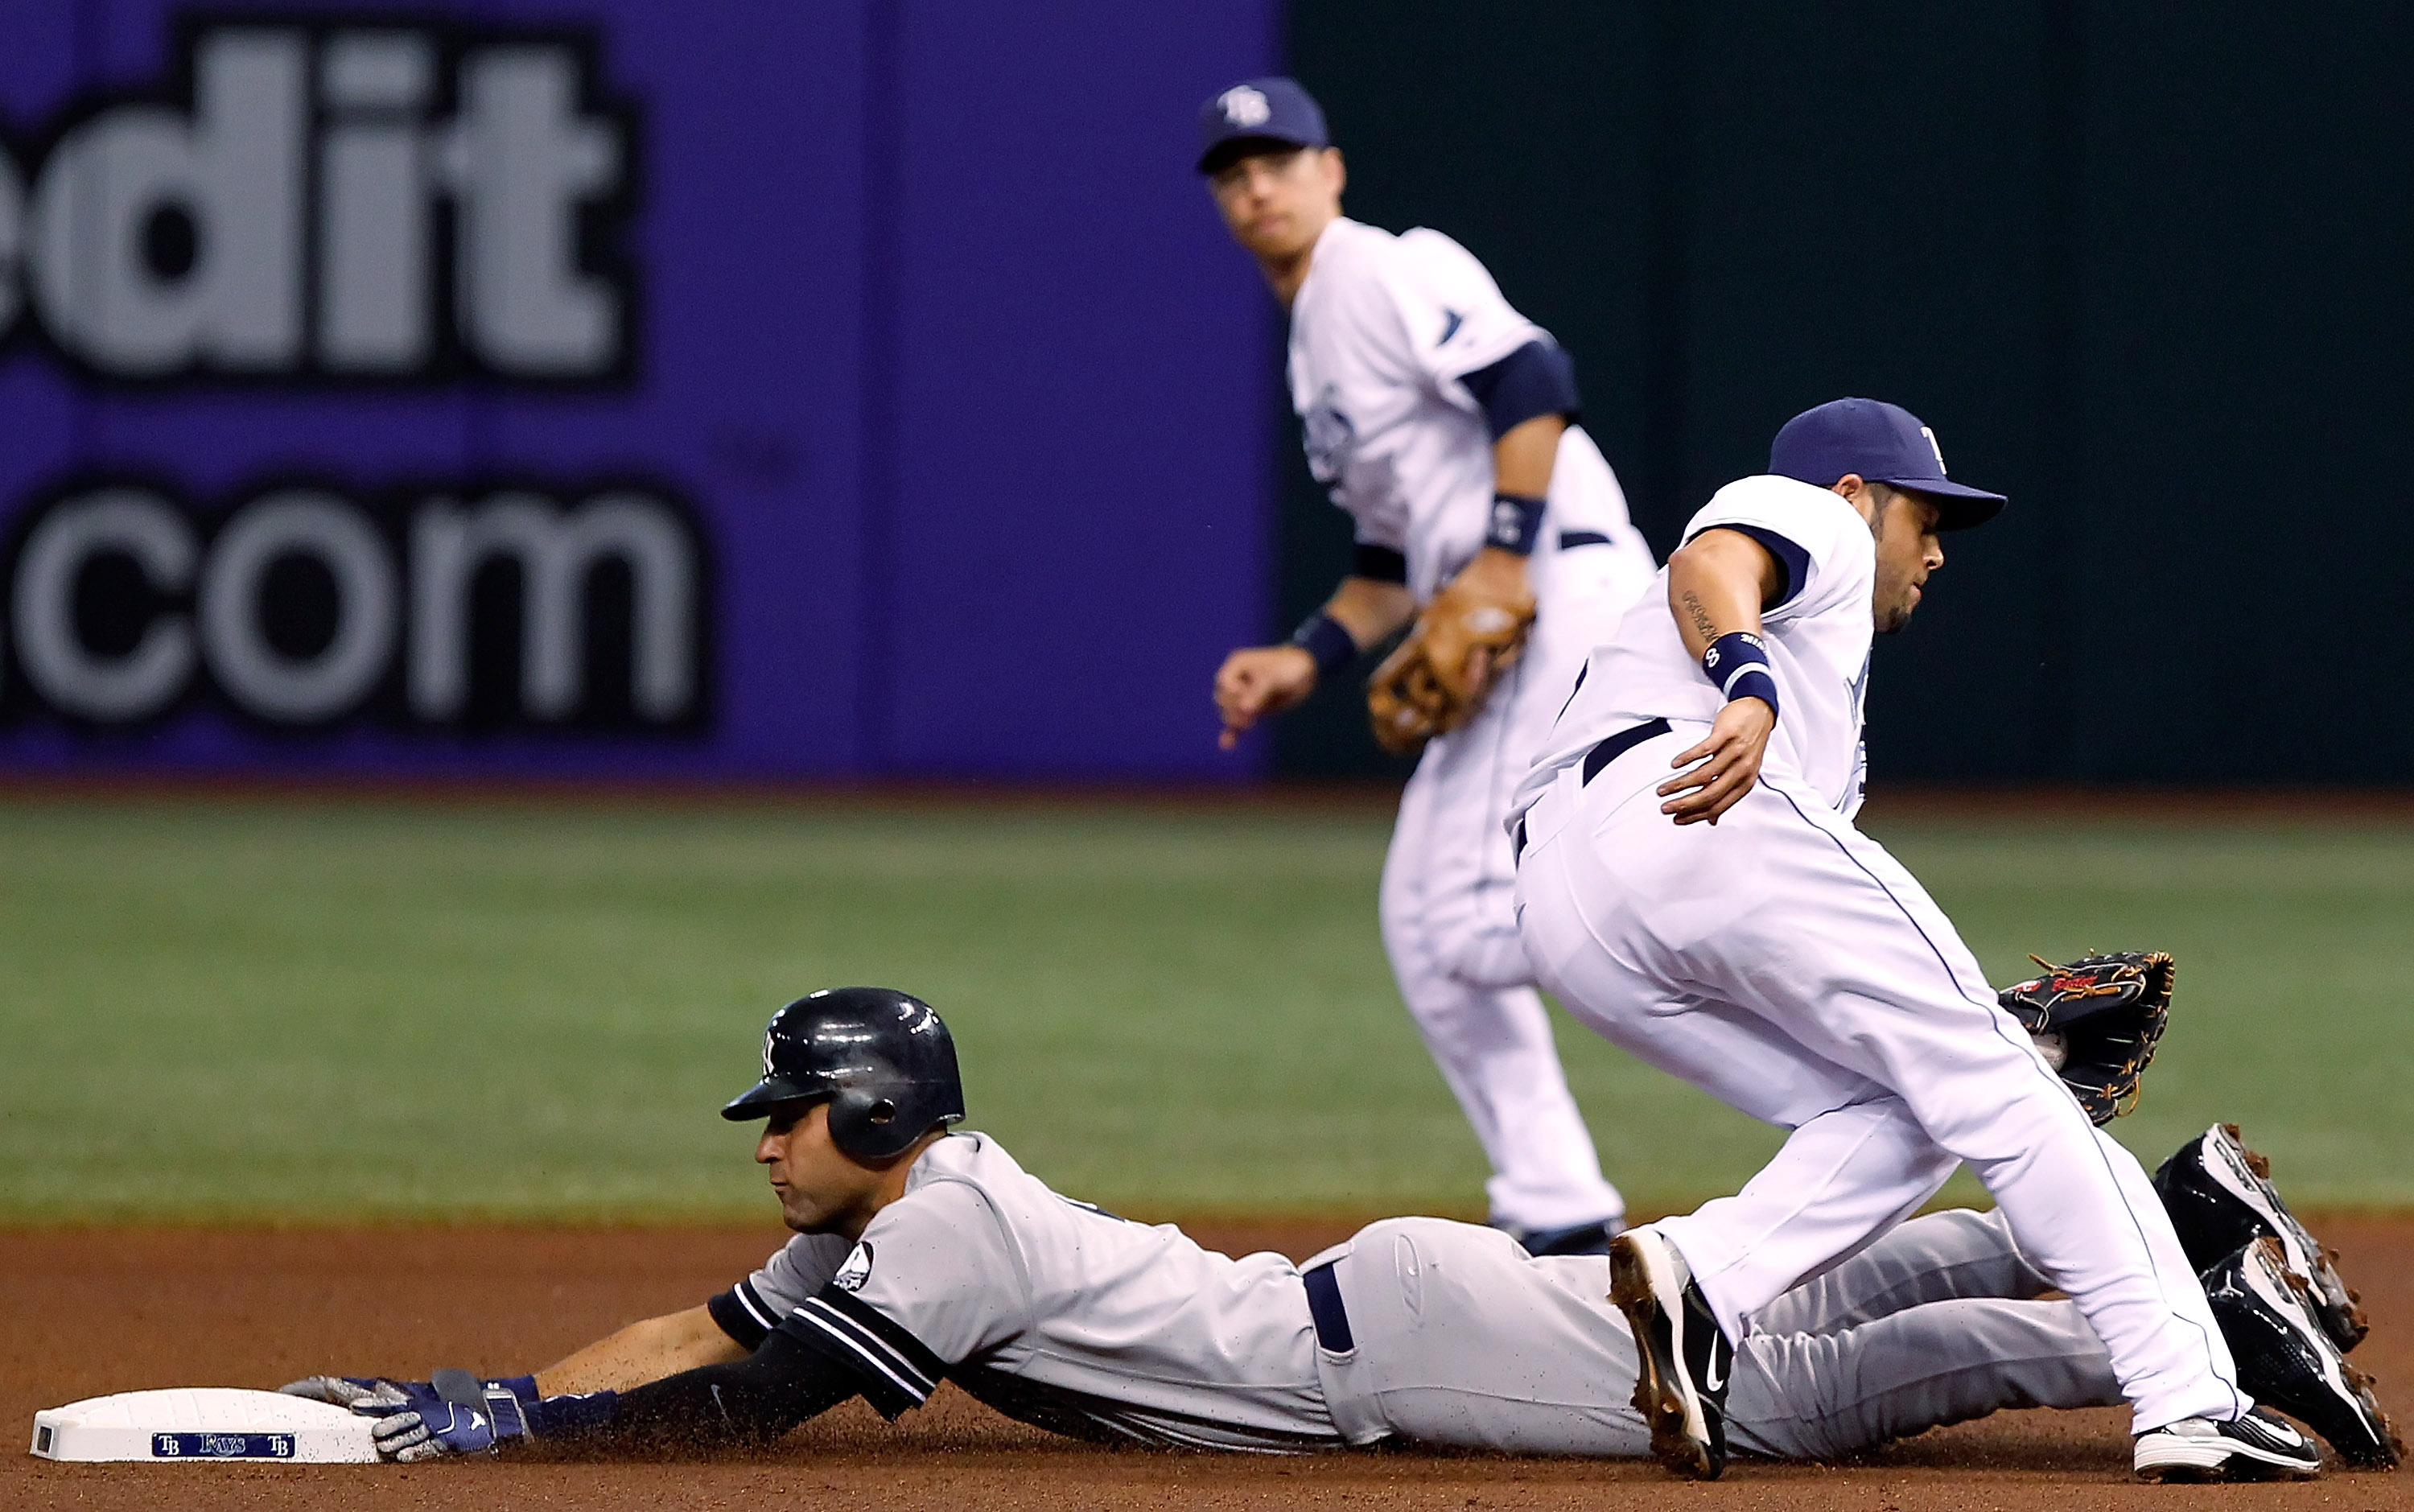 ST. PETERSBURG, FL - SEPTEMBER 15:  Shortstop Derek Jeter #2 of the New York Yankees steals second base as shortstop Jason Bartlett #8 of the Tampa Bay Rays is late with the tag during the game at Tropicana Field on September 15, 2010 in St. Petersburg, F